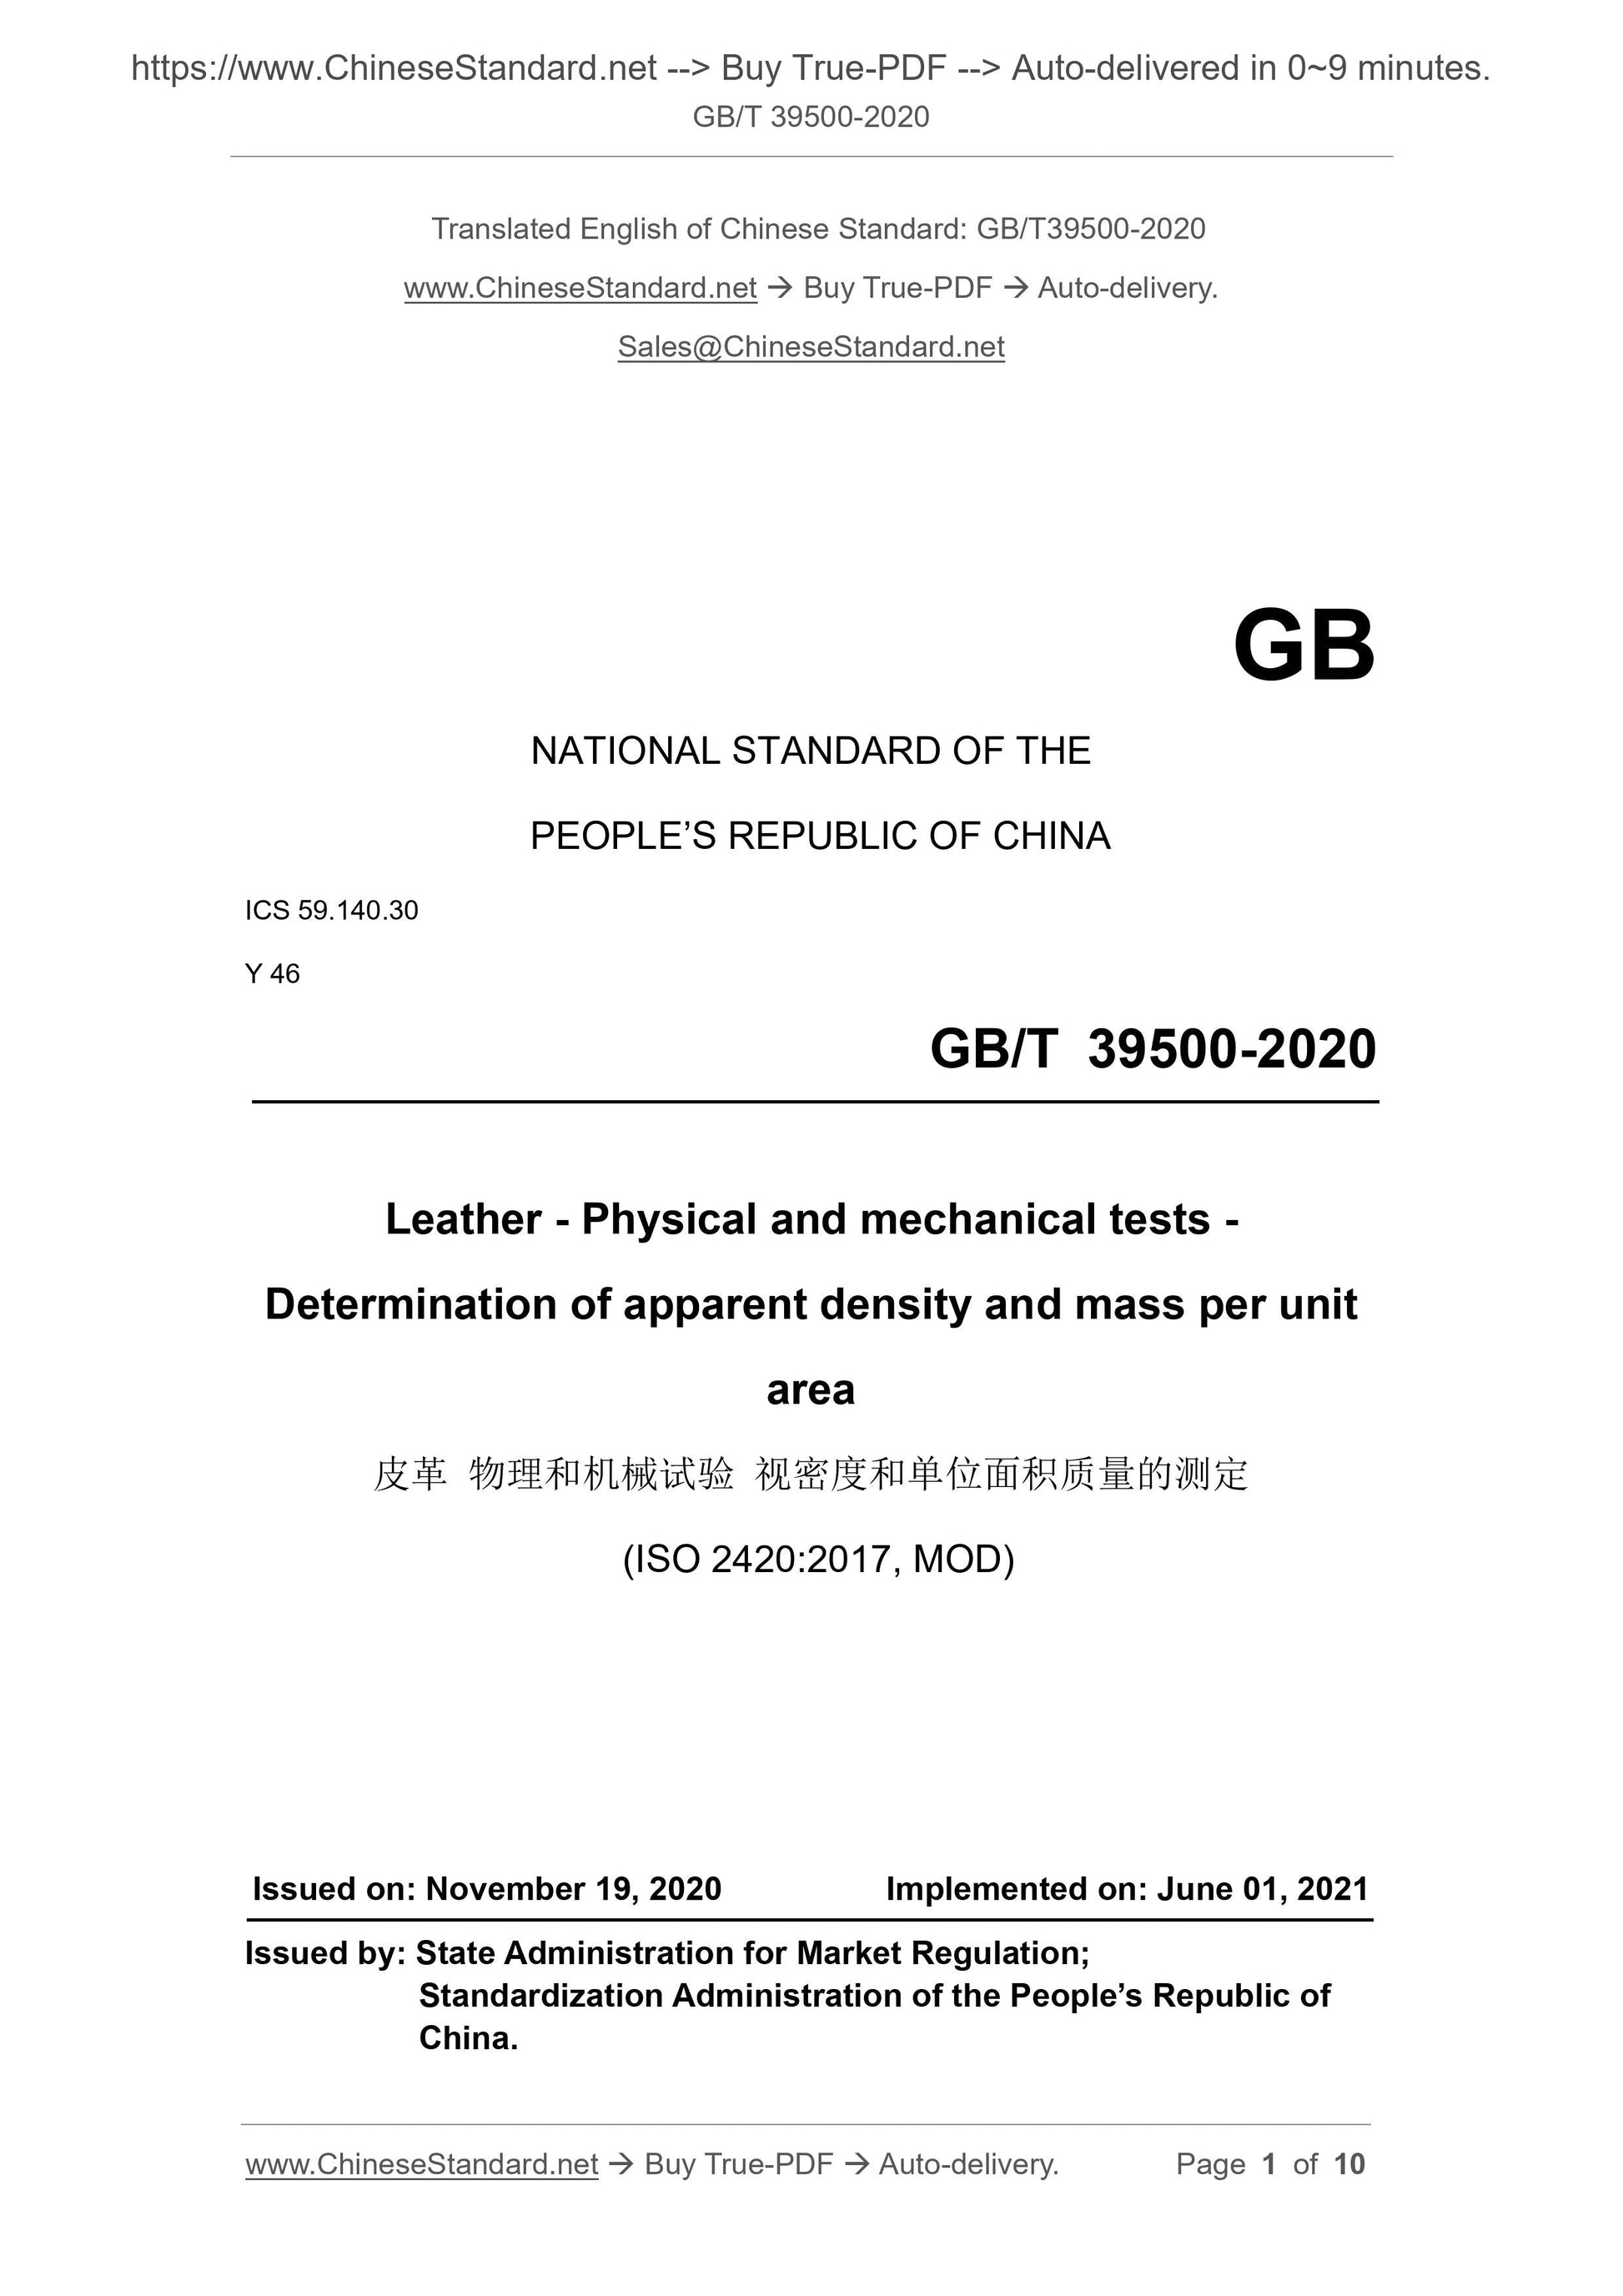 GB/T 39500-2020 Page 1